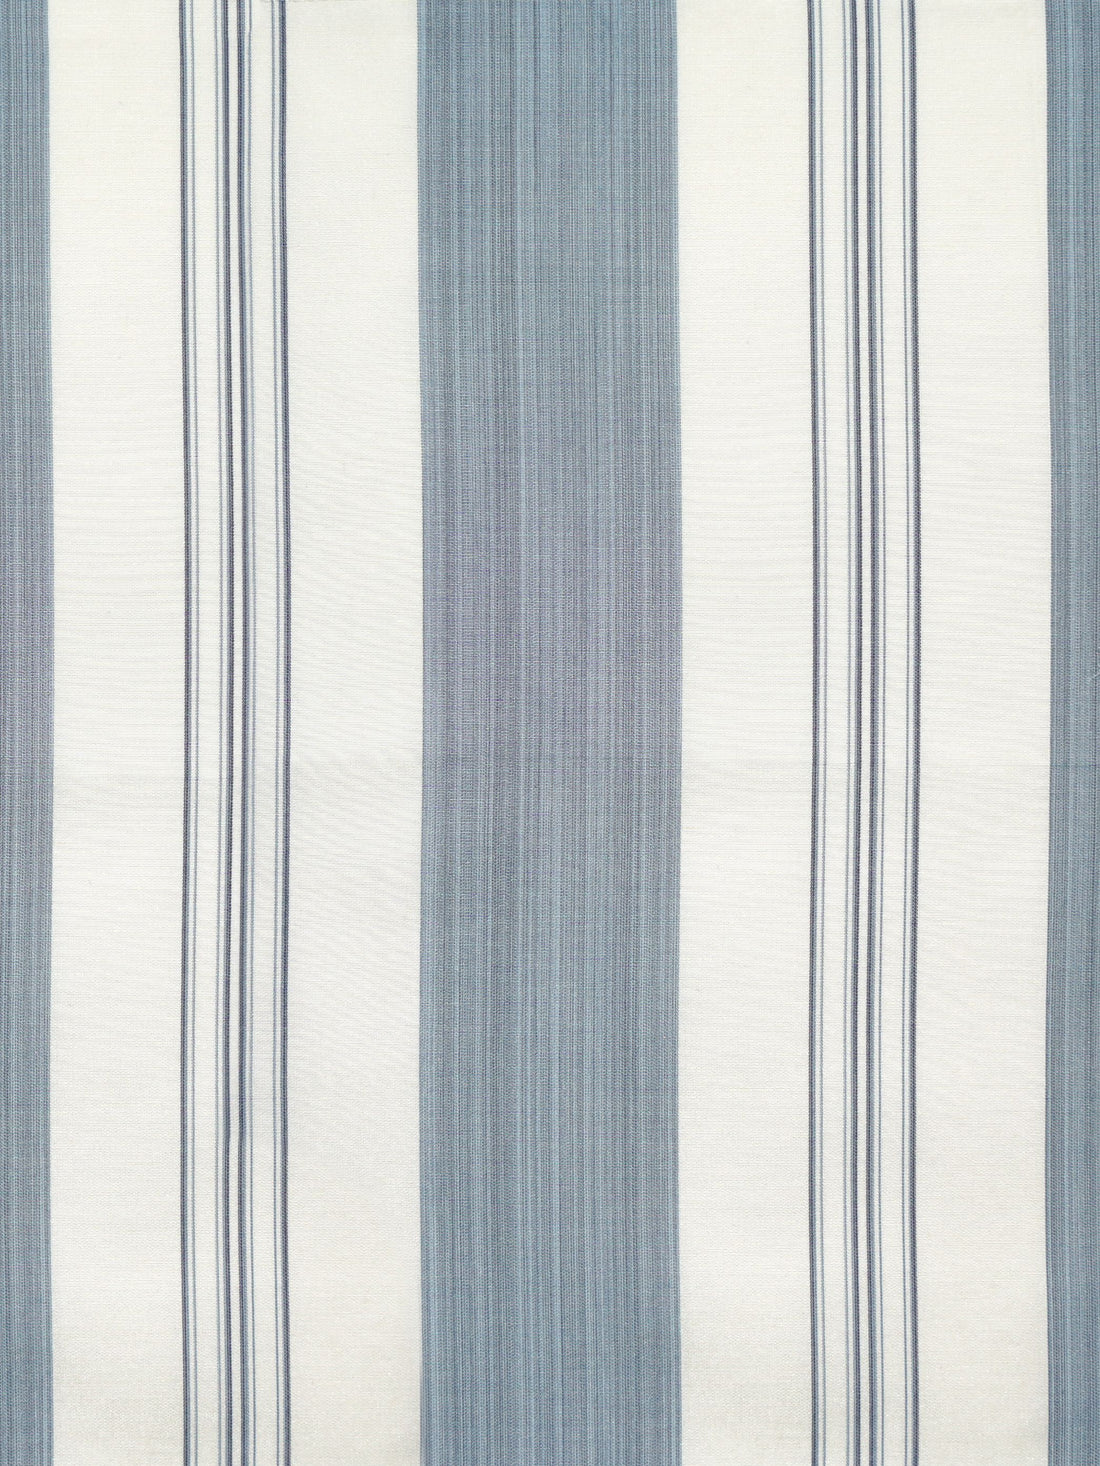 Astor Stripe fabric in indigo color - pattern number SC 000226982 - by Scalamandre in the Scalamandre Fabrics Book 1 collection